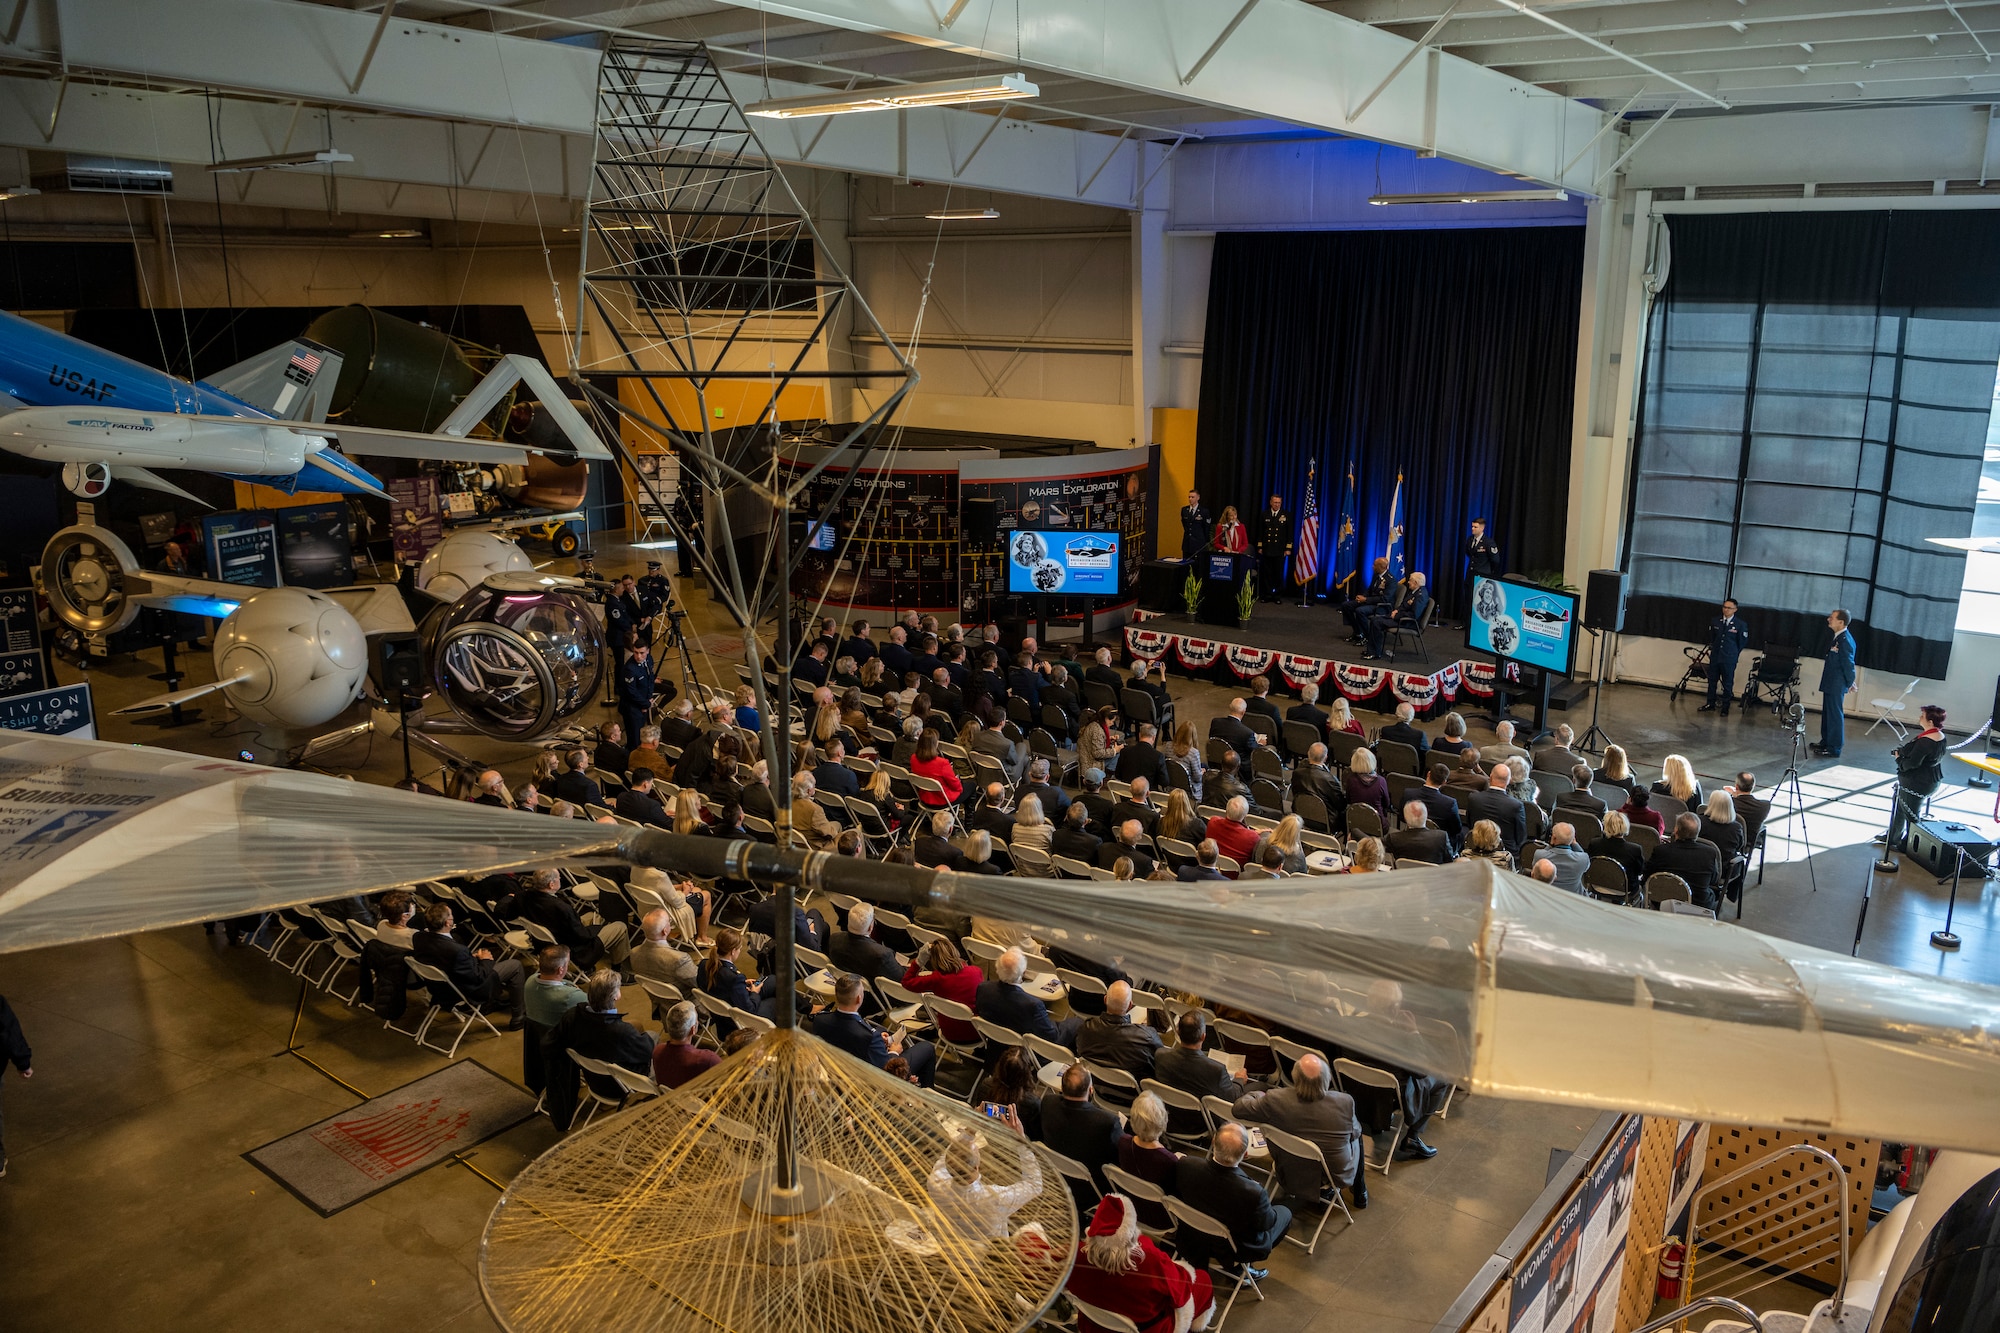 An overall photo of a large aviation museum with aircraft displayed throughout as well as a large crowd of people sitting in chairs in front of a stage.